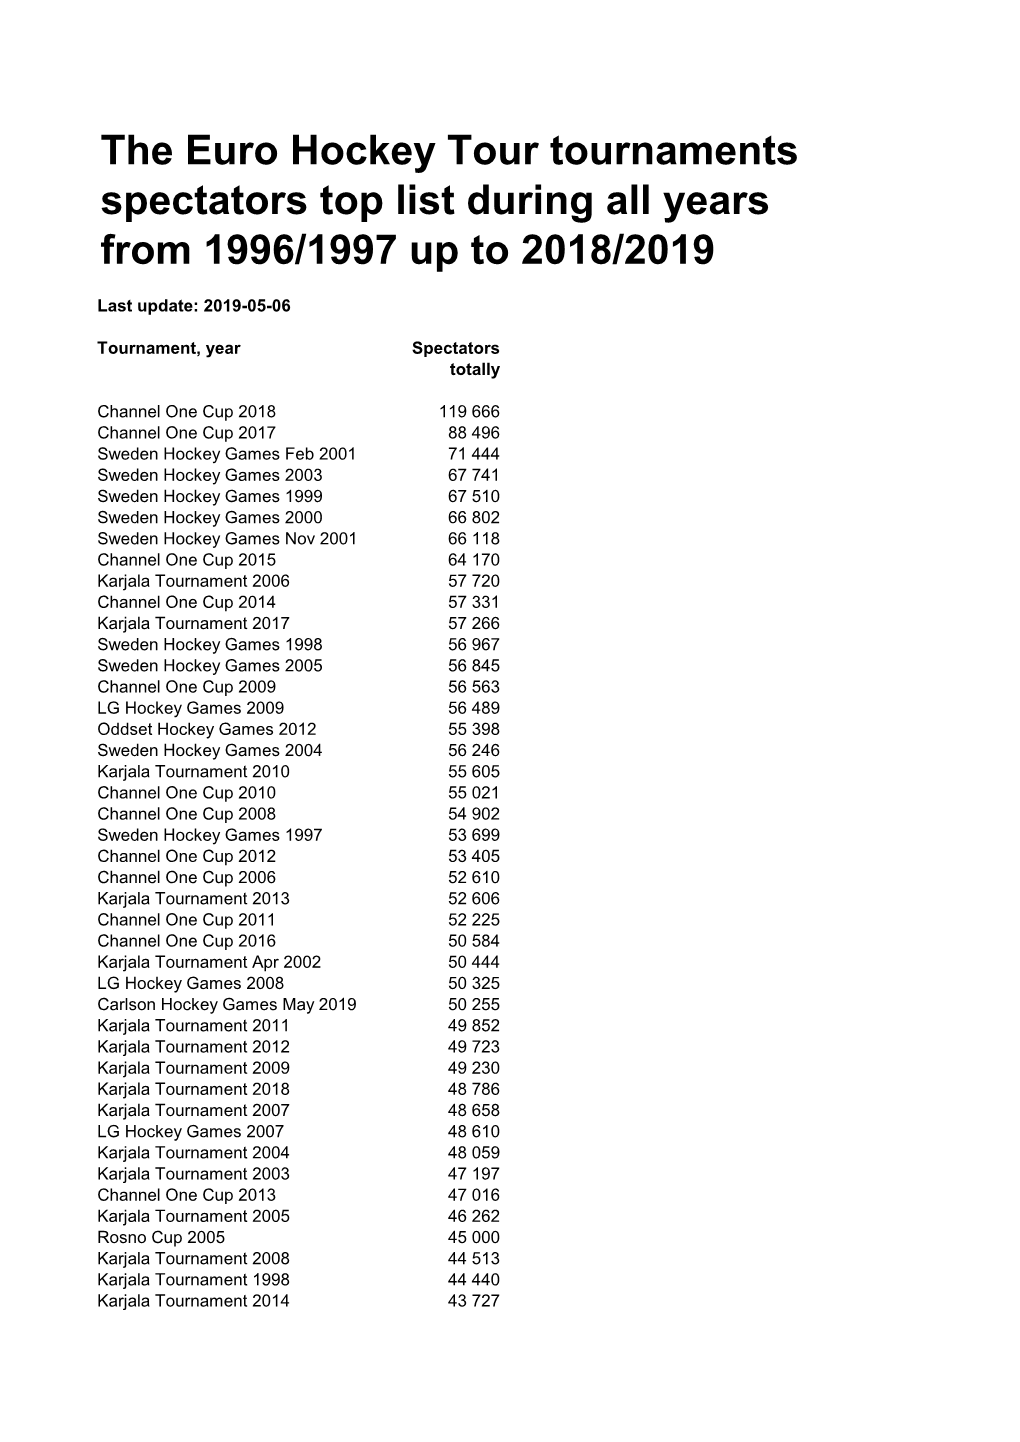 The Euro Hockey Tour Tournaments Spectators Top List During All Years from 1996/1997 up to 2018/2019